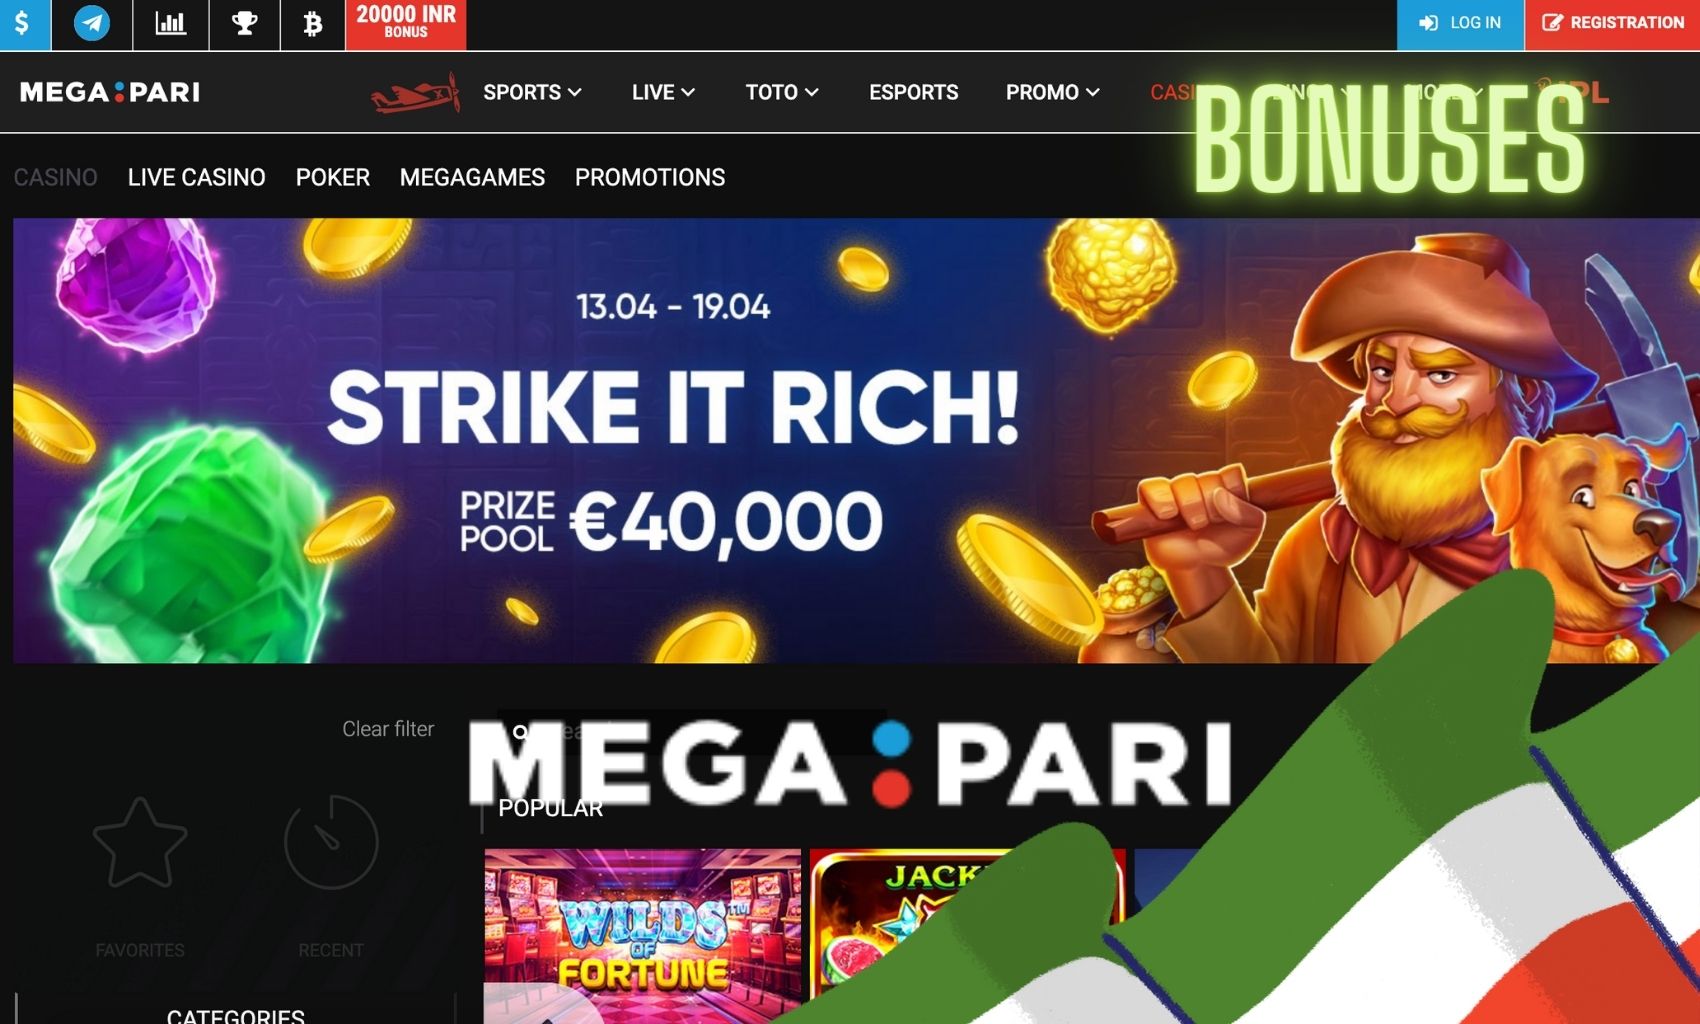 An Overview of the Different Bonuses Available at the MEGAPARI Casino Platform